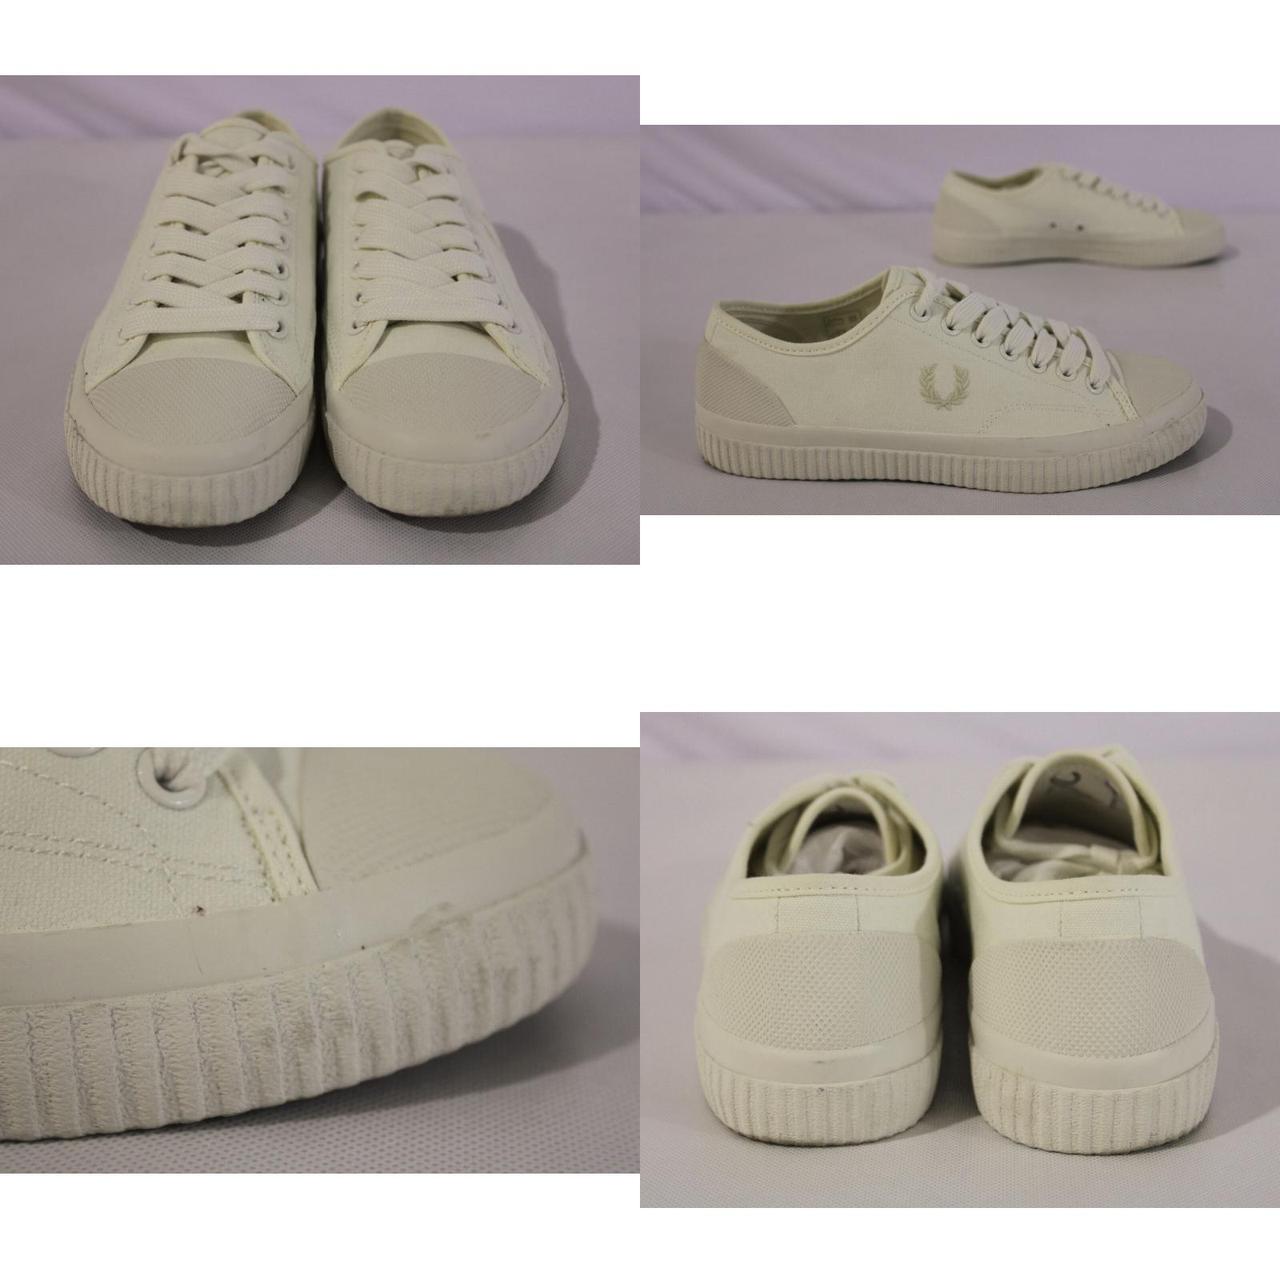 Fred Perry Women's Margaret Howell Hughes Canvas - Depop